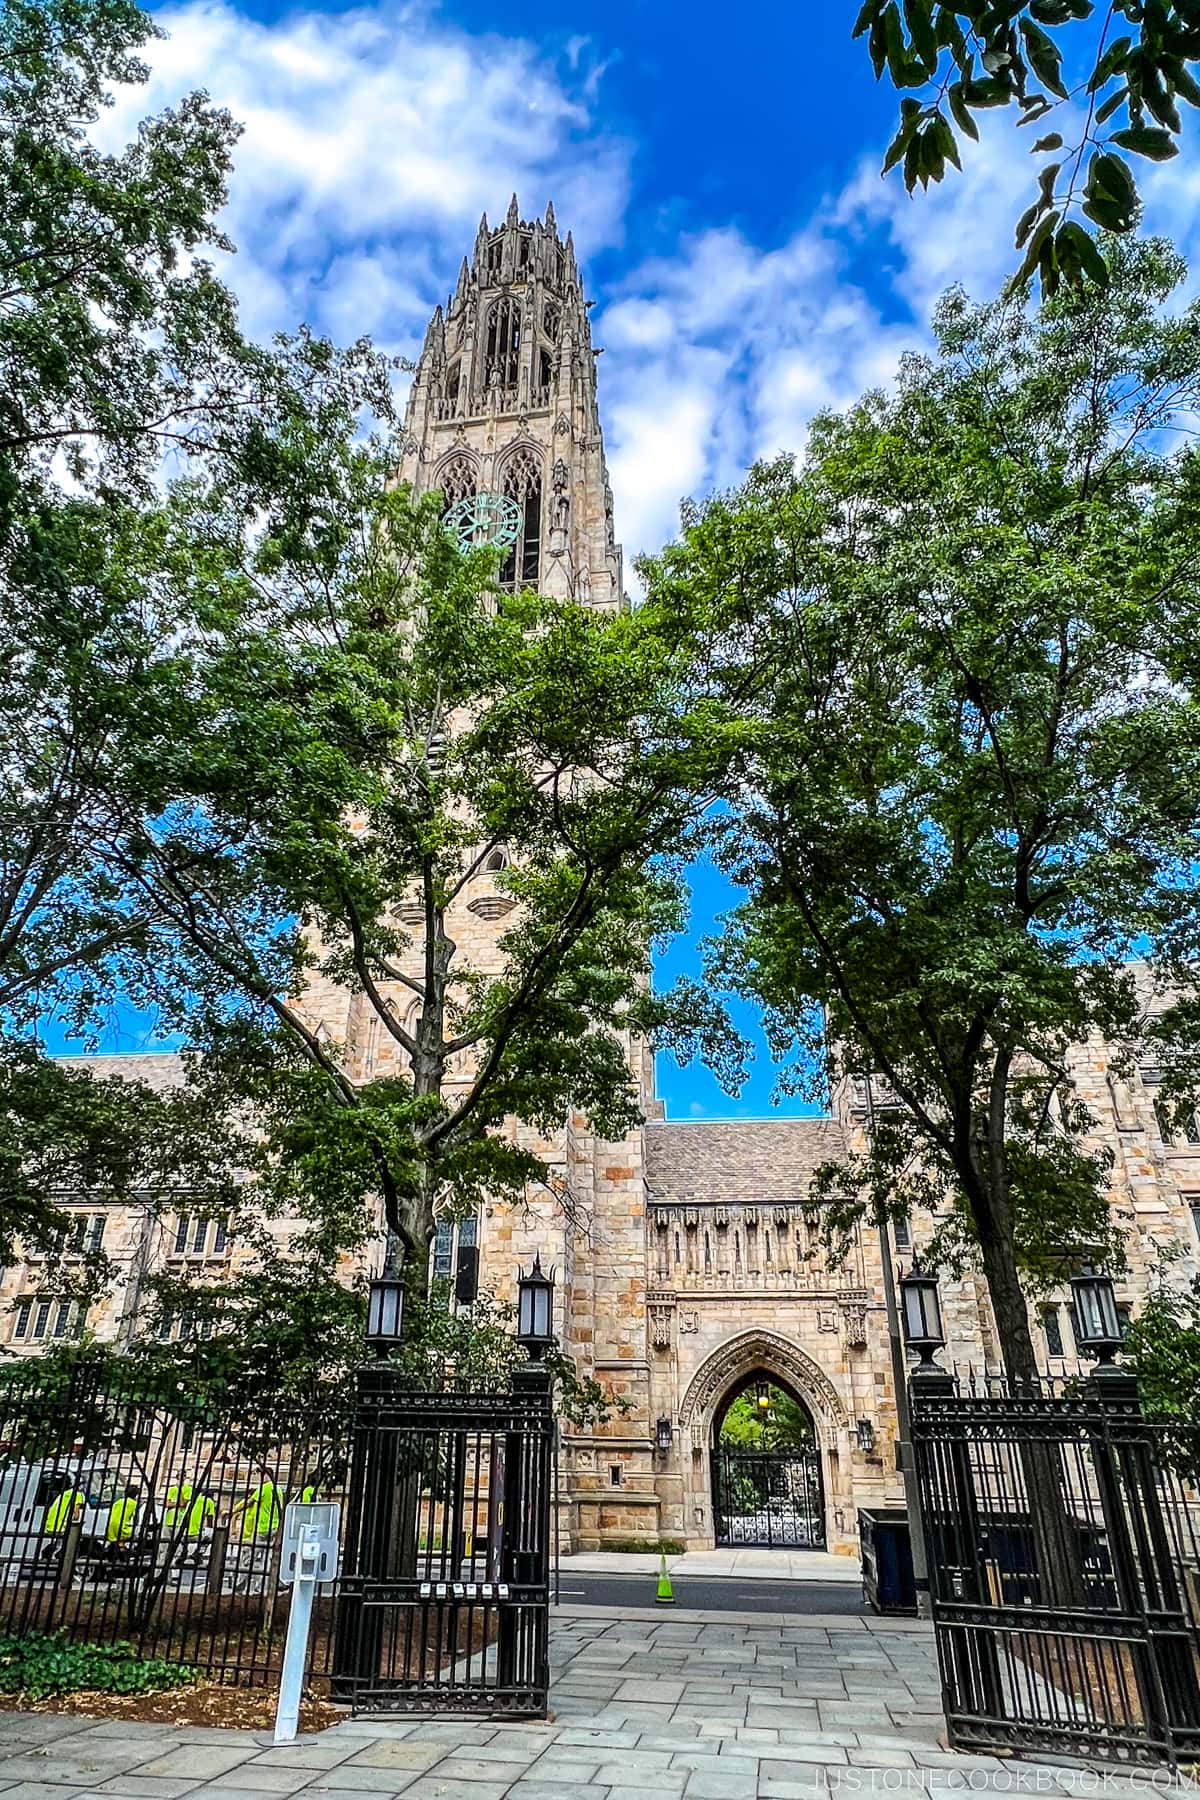 Harkness Tower at Yale University